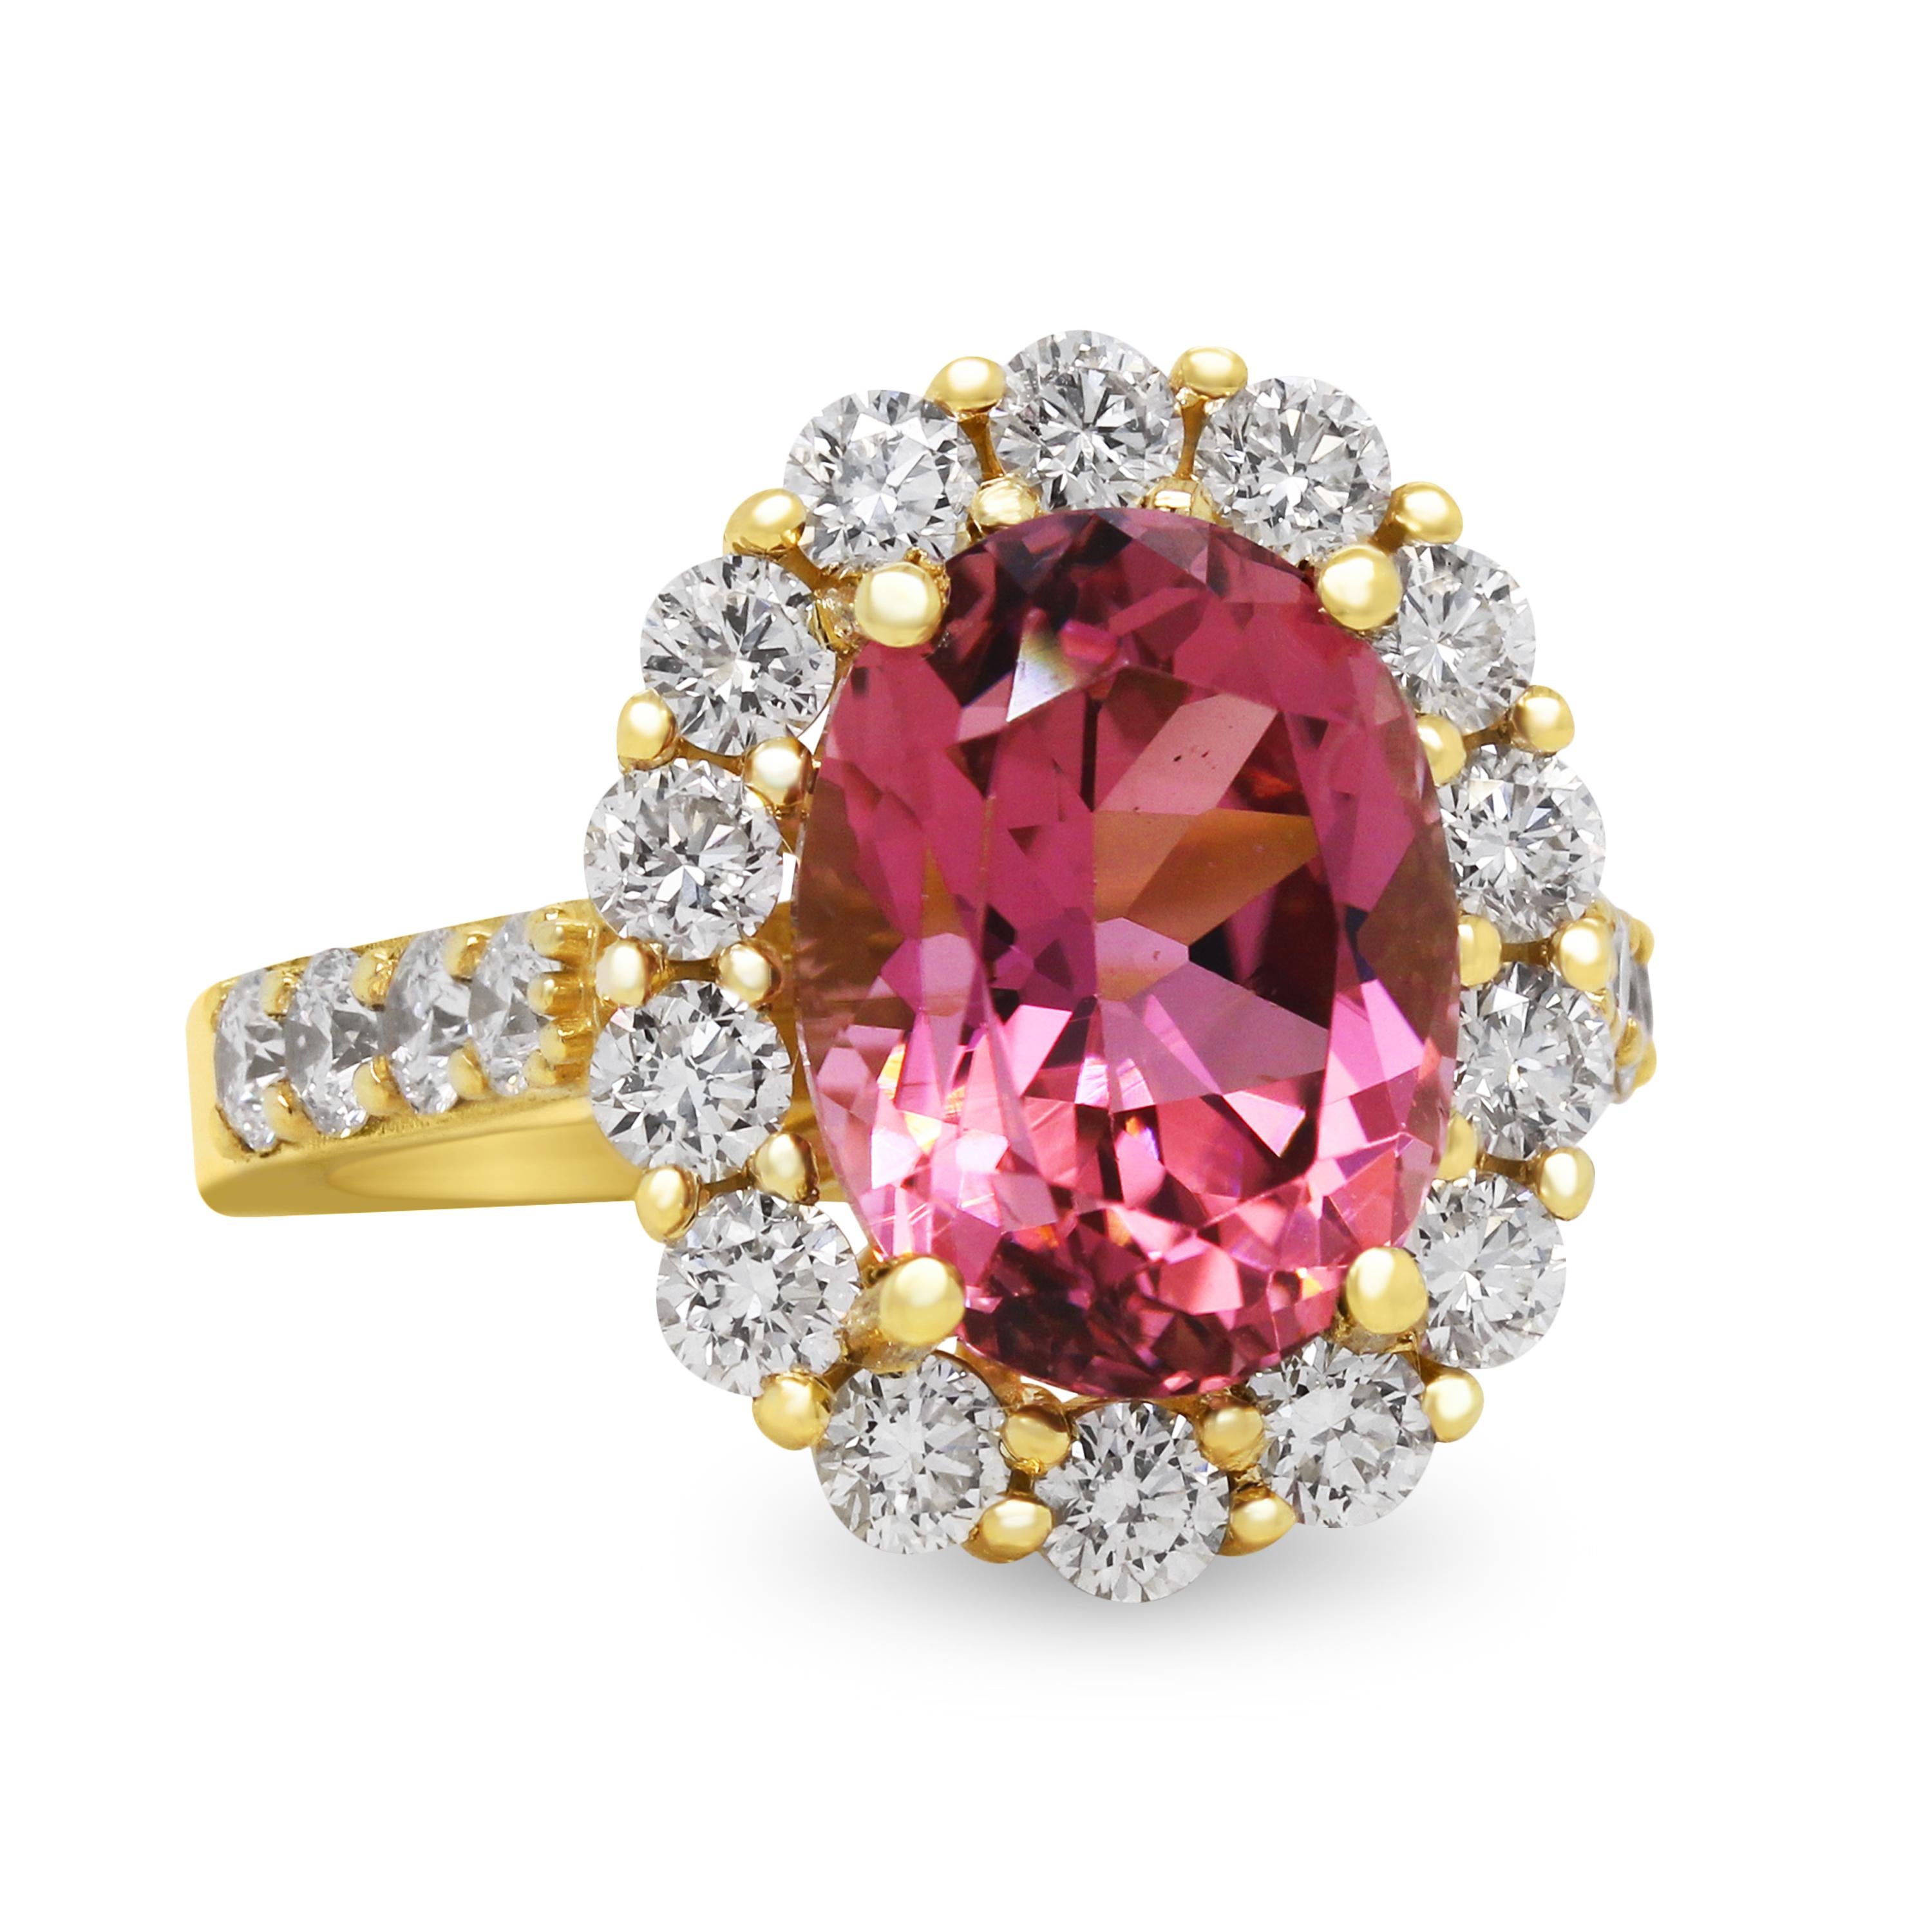 5.89 Carat Oval Cut Pink Tourmaline 18 Karat Yellow Gold Diamond Cocktail Ring

This one-of-a-kind ring features a gorgeous, vibrant pink tourmaline center with diamonds surrounding along with half way on the band.

5.89 carat Pink Tourmaline